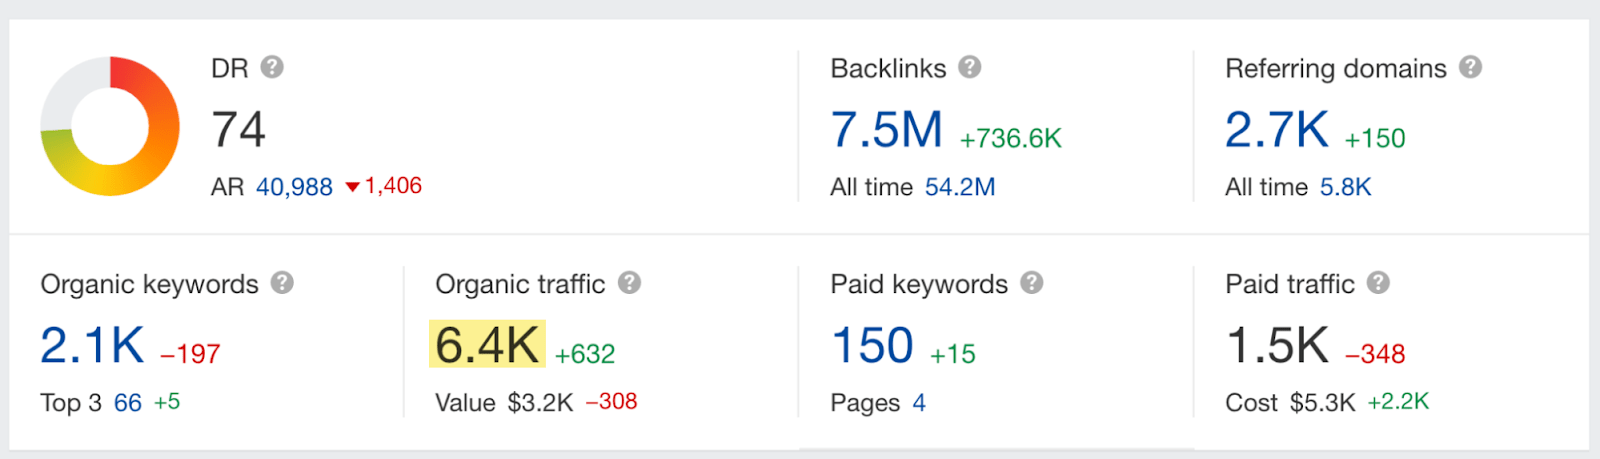 Site Explorer overview; note the monthly organic traffic of 6.4K